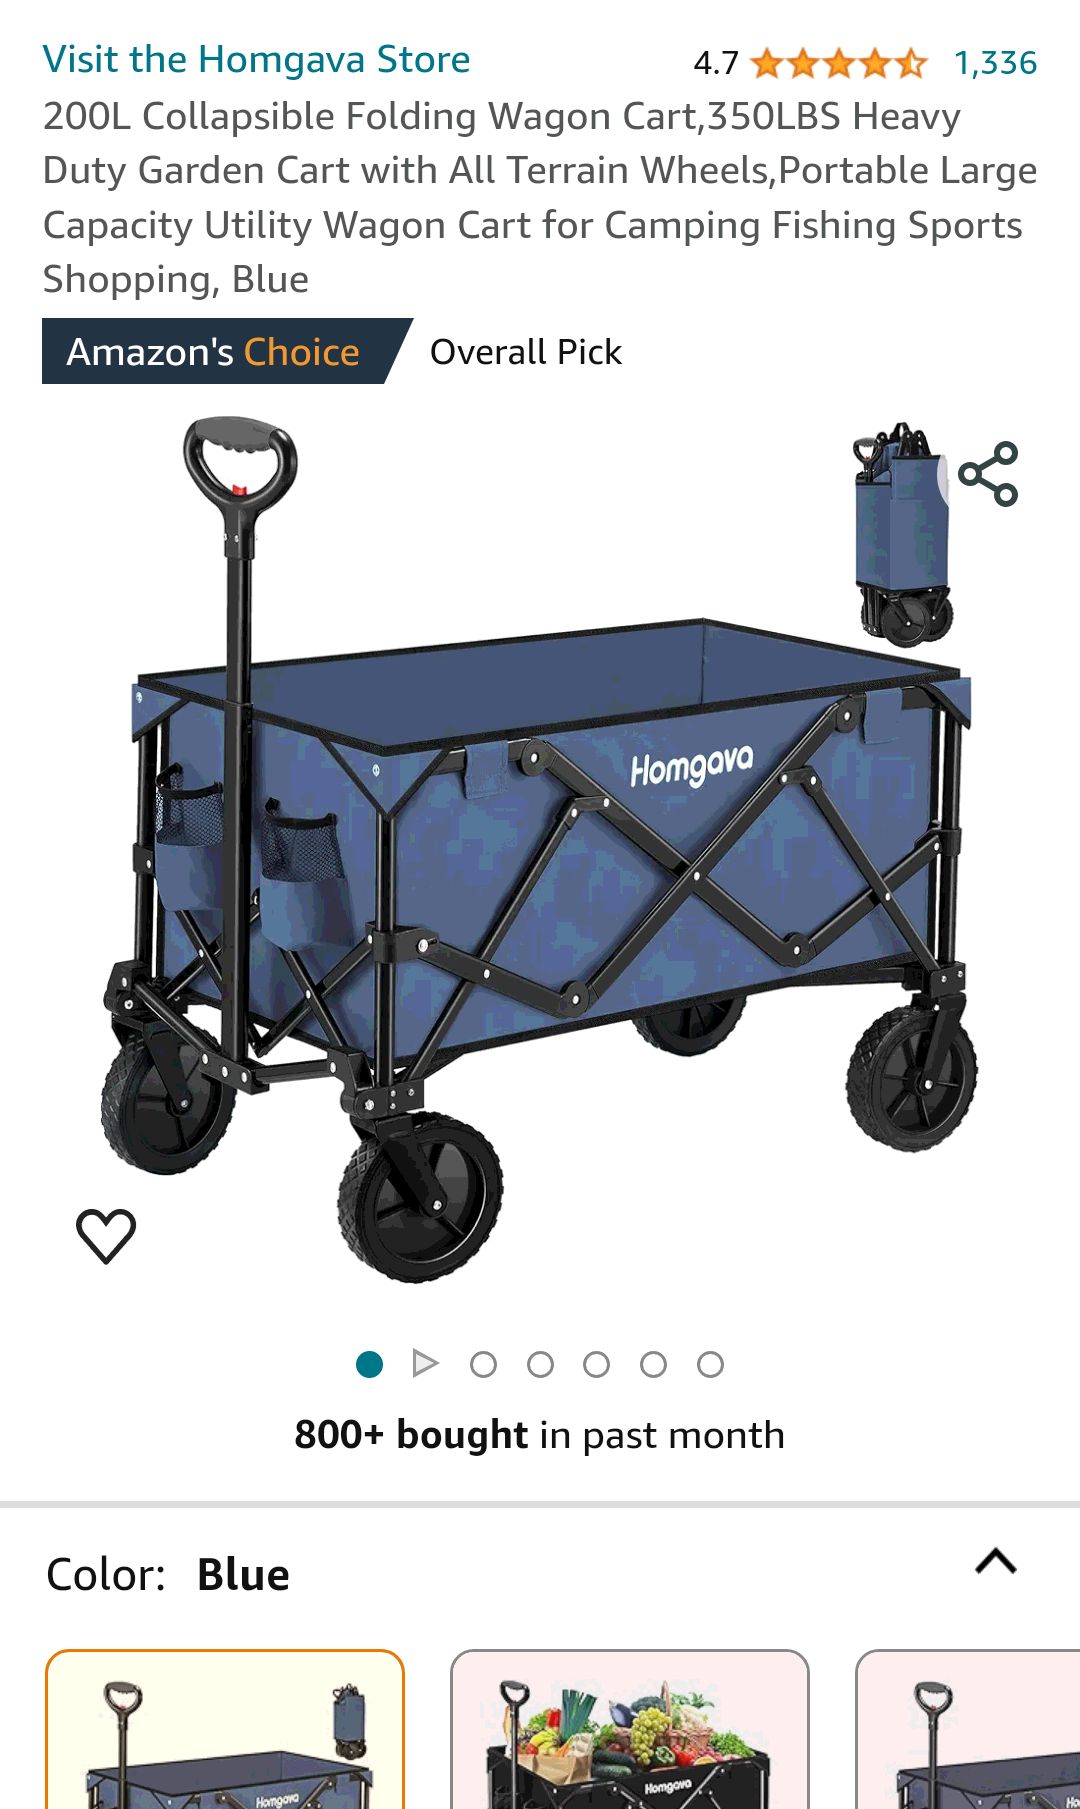 Amazon.com : Homgava 200L Collapsible Folding Wagon Cart,350LBS Heavy Duty Garden Cart with All Terrain Wheels,Portable Large Capacity Utility Wagon Cart for Camping Fishing Sports Shopping, Blue : Pa